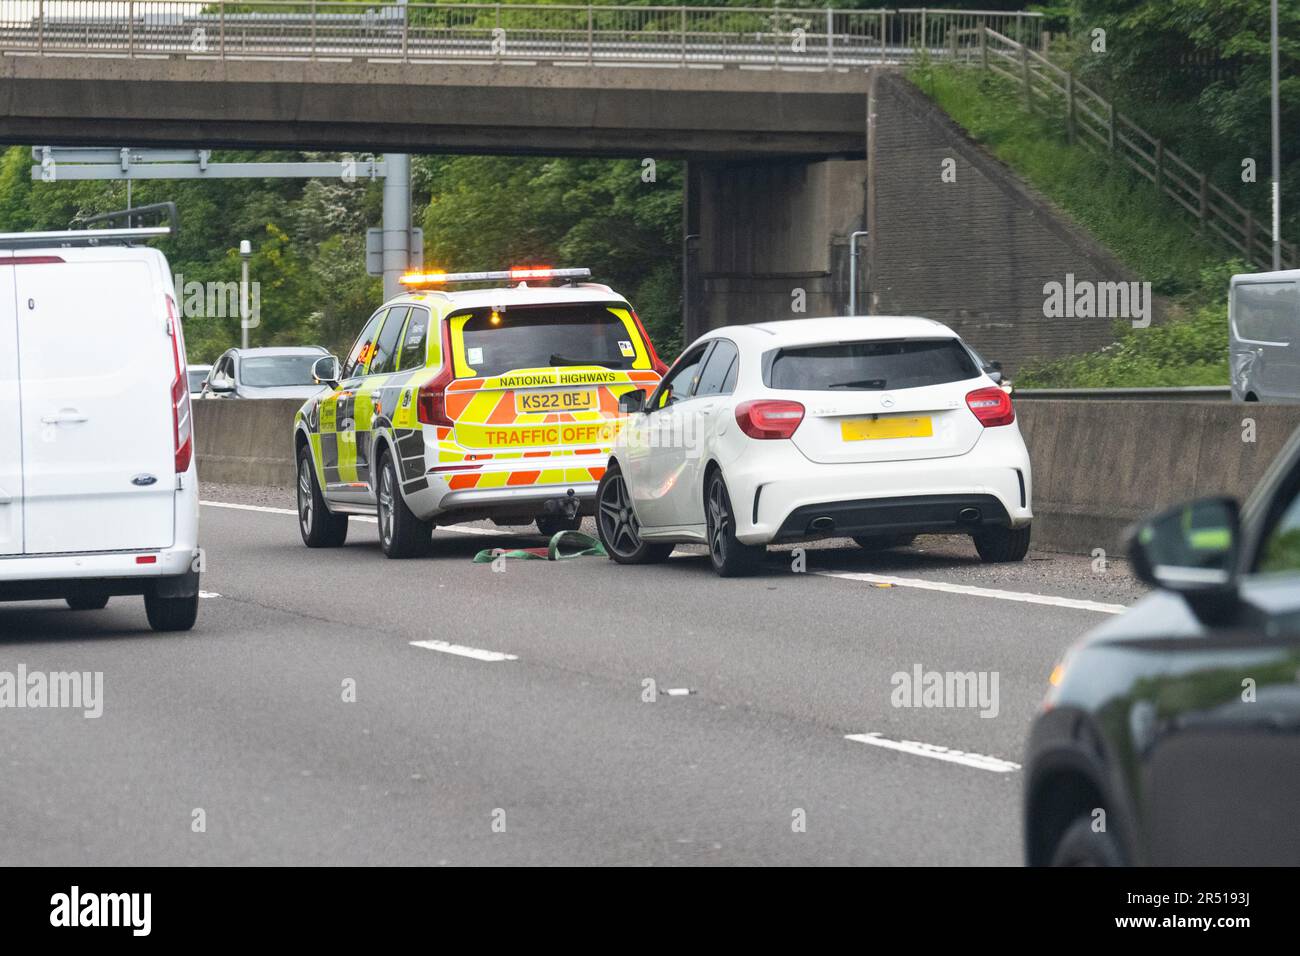 Breakdown in outside lane of M1 smart motorway.  Broken down car with Traffic Officer vehicle in attendance with tow rope - England, UK Stock Photo